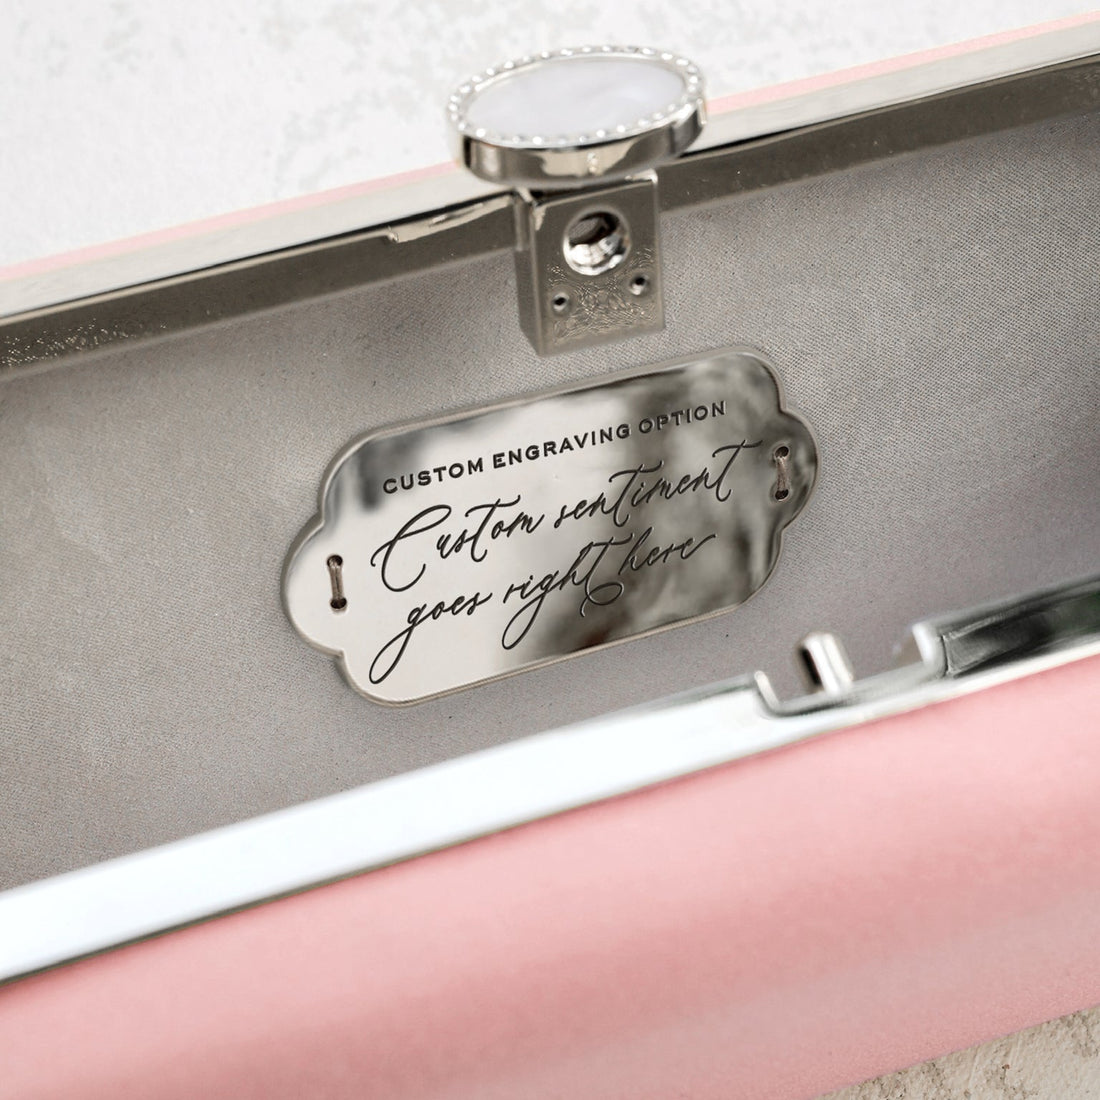 A Bat Mitzvah Personalized Bella Clutch Petite from The Bella Rosa Collection, with a silver plaque, perfect for Bat Mitzvah.